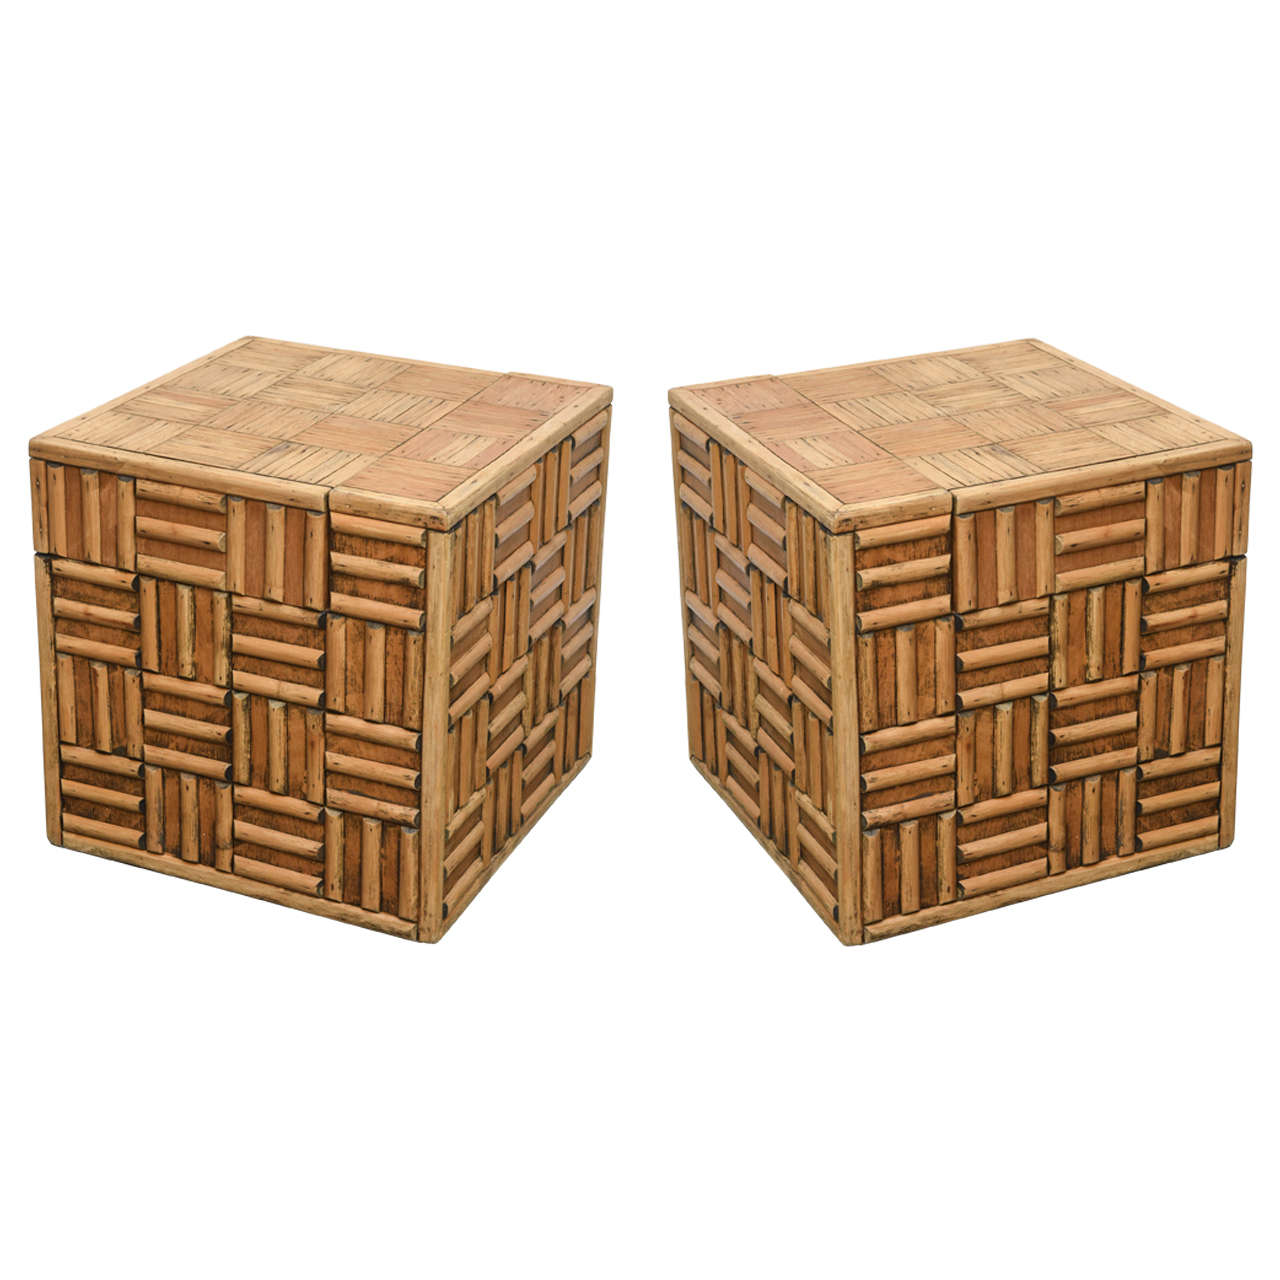 Pair of Rattan Cube End Tables or Mini Bar Cabinets